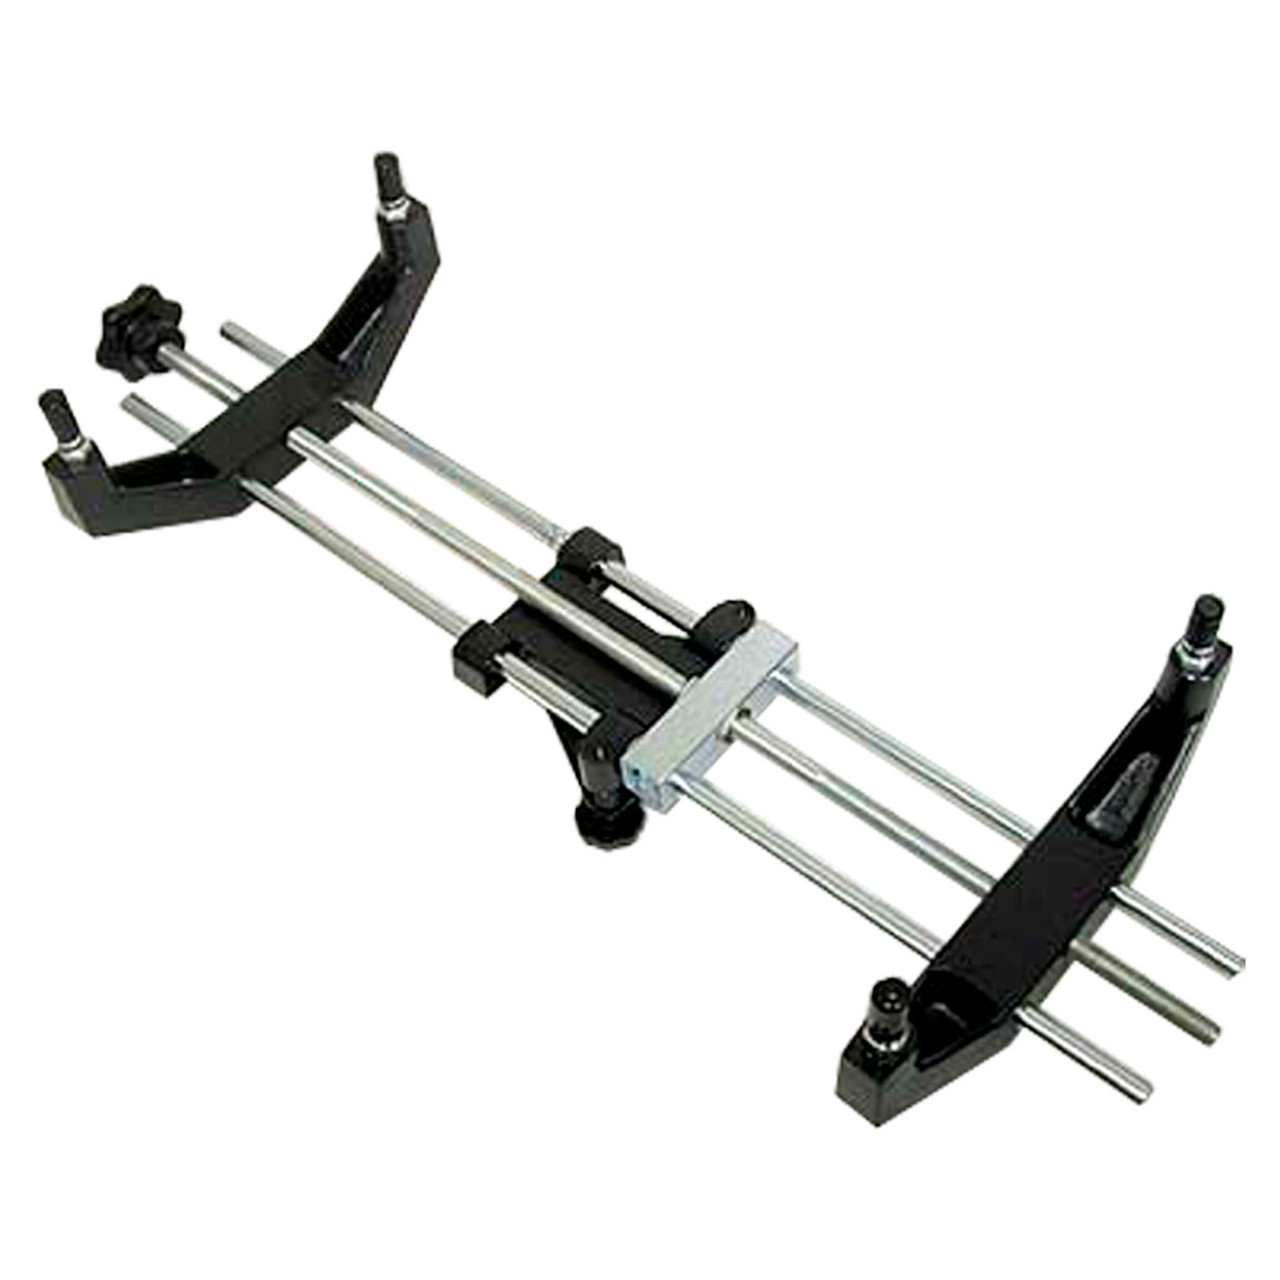 8170 - Truck Large Rim Universal Alignment 16" to 26" Wheel Clamp Adapter - Bottom View by MT-RSR | McBay Performance